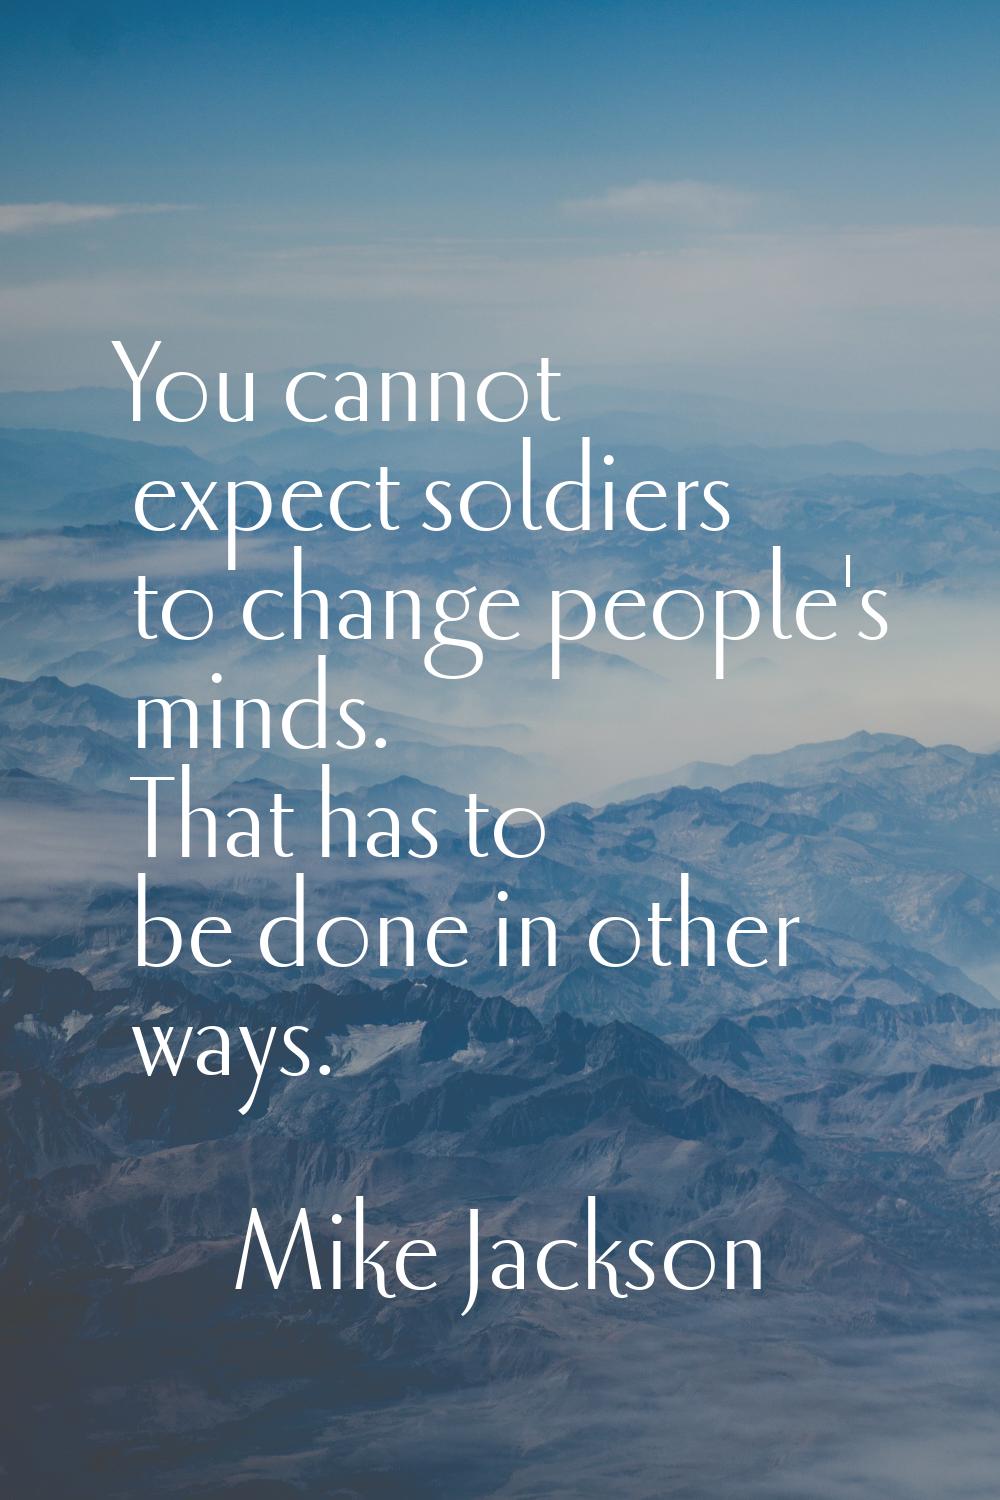 You cannot expect soldiers to change people's minds. That has to be done in other ways.